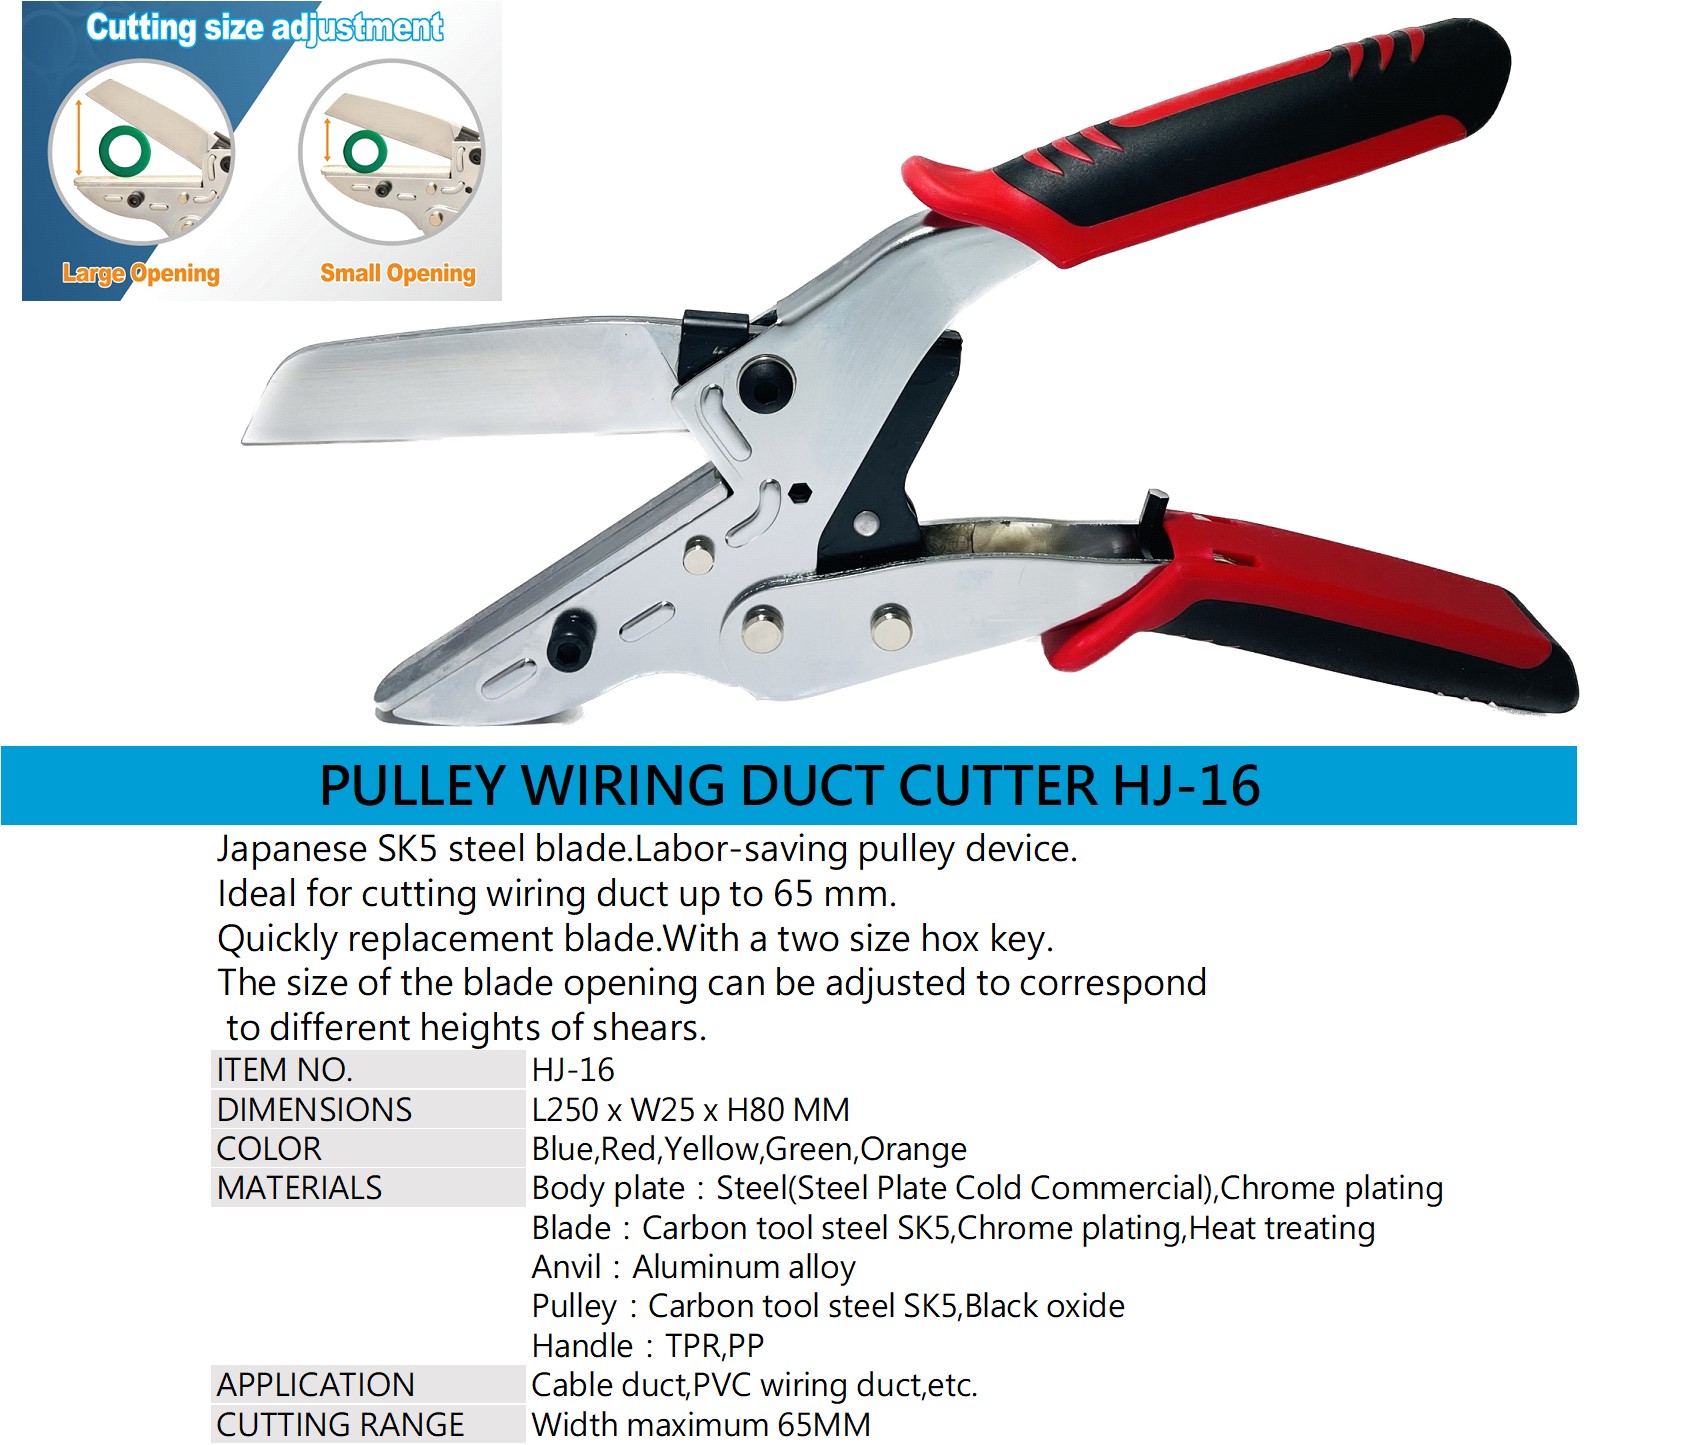 PULLEY WIRING DUCT CUTTER HJ-16